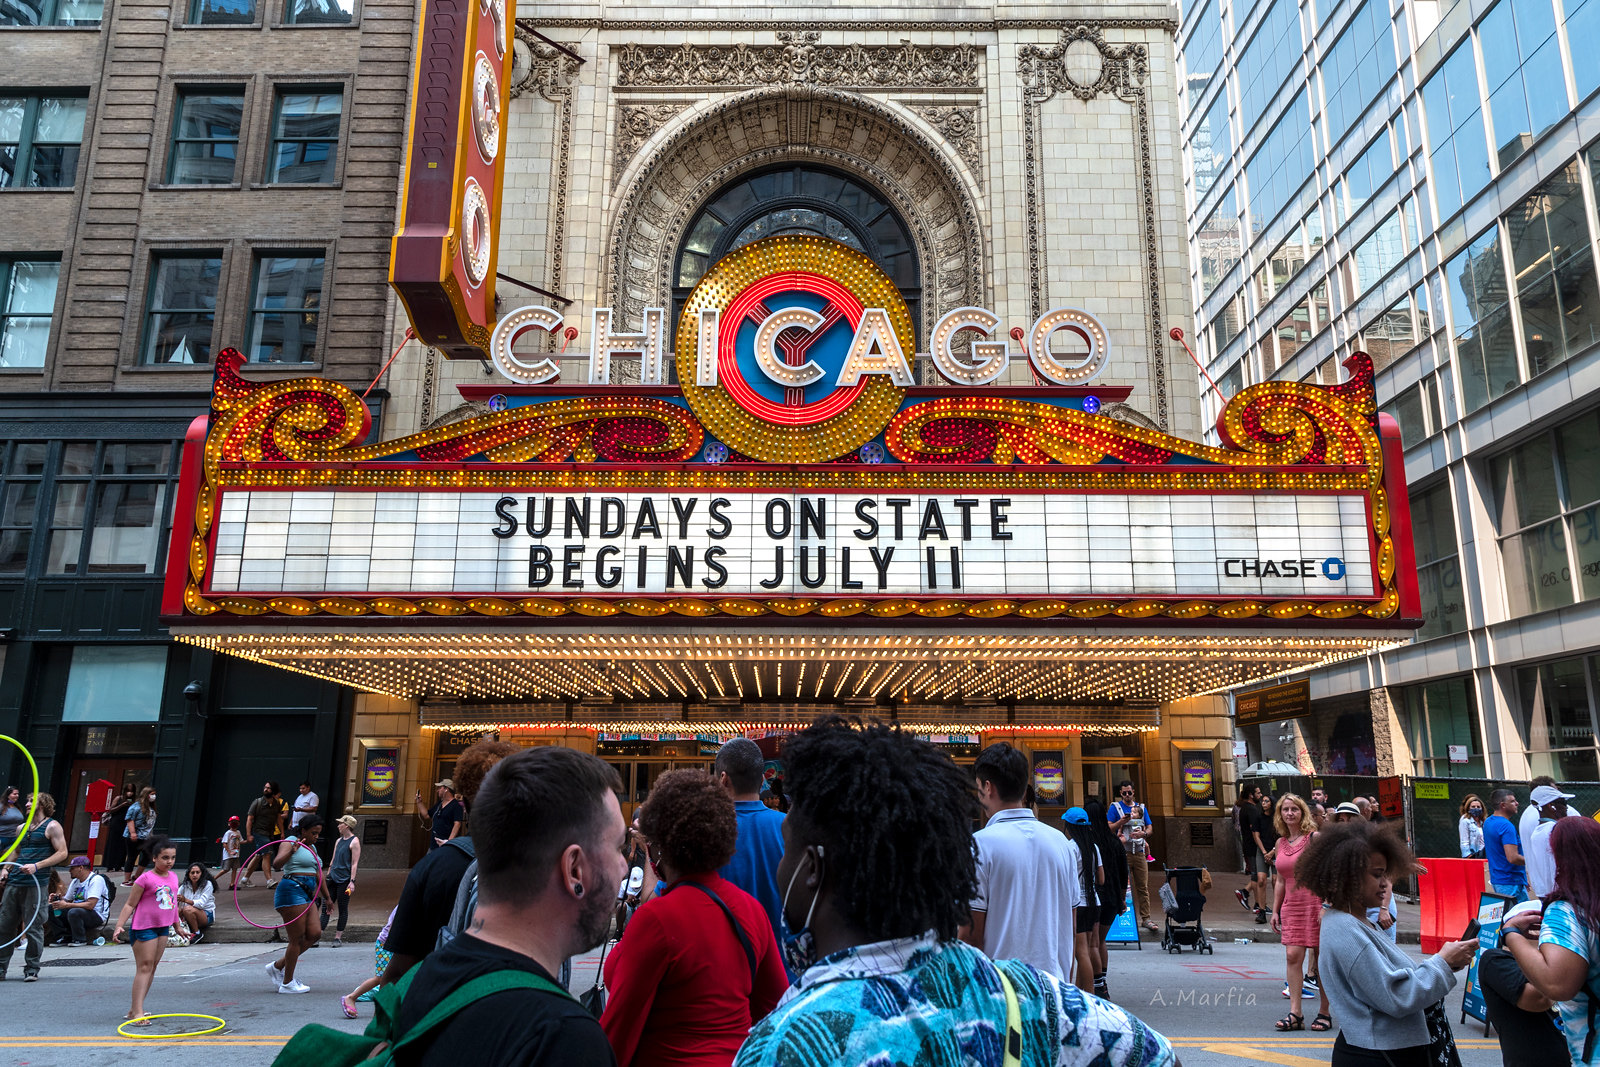 Sundays on State on the Chicago Theater marquee (date on the sign is from 2021).